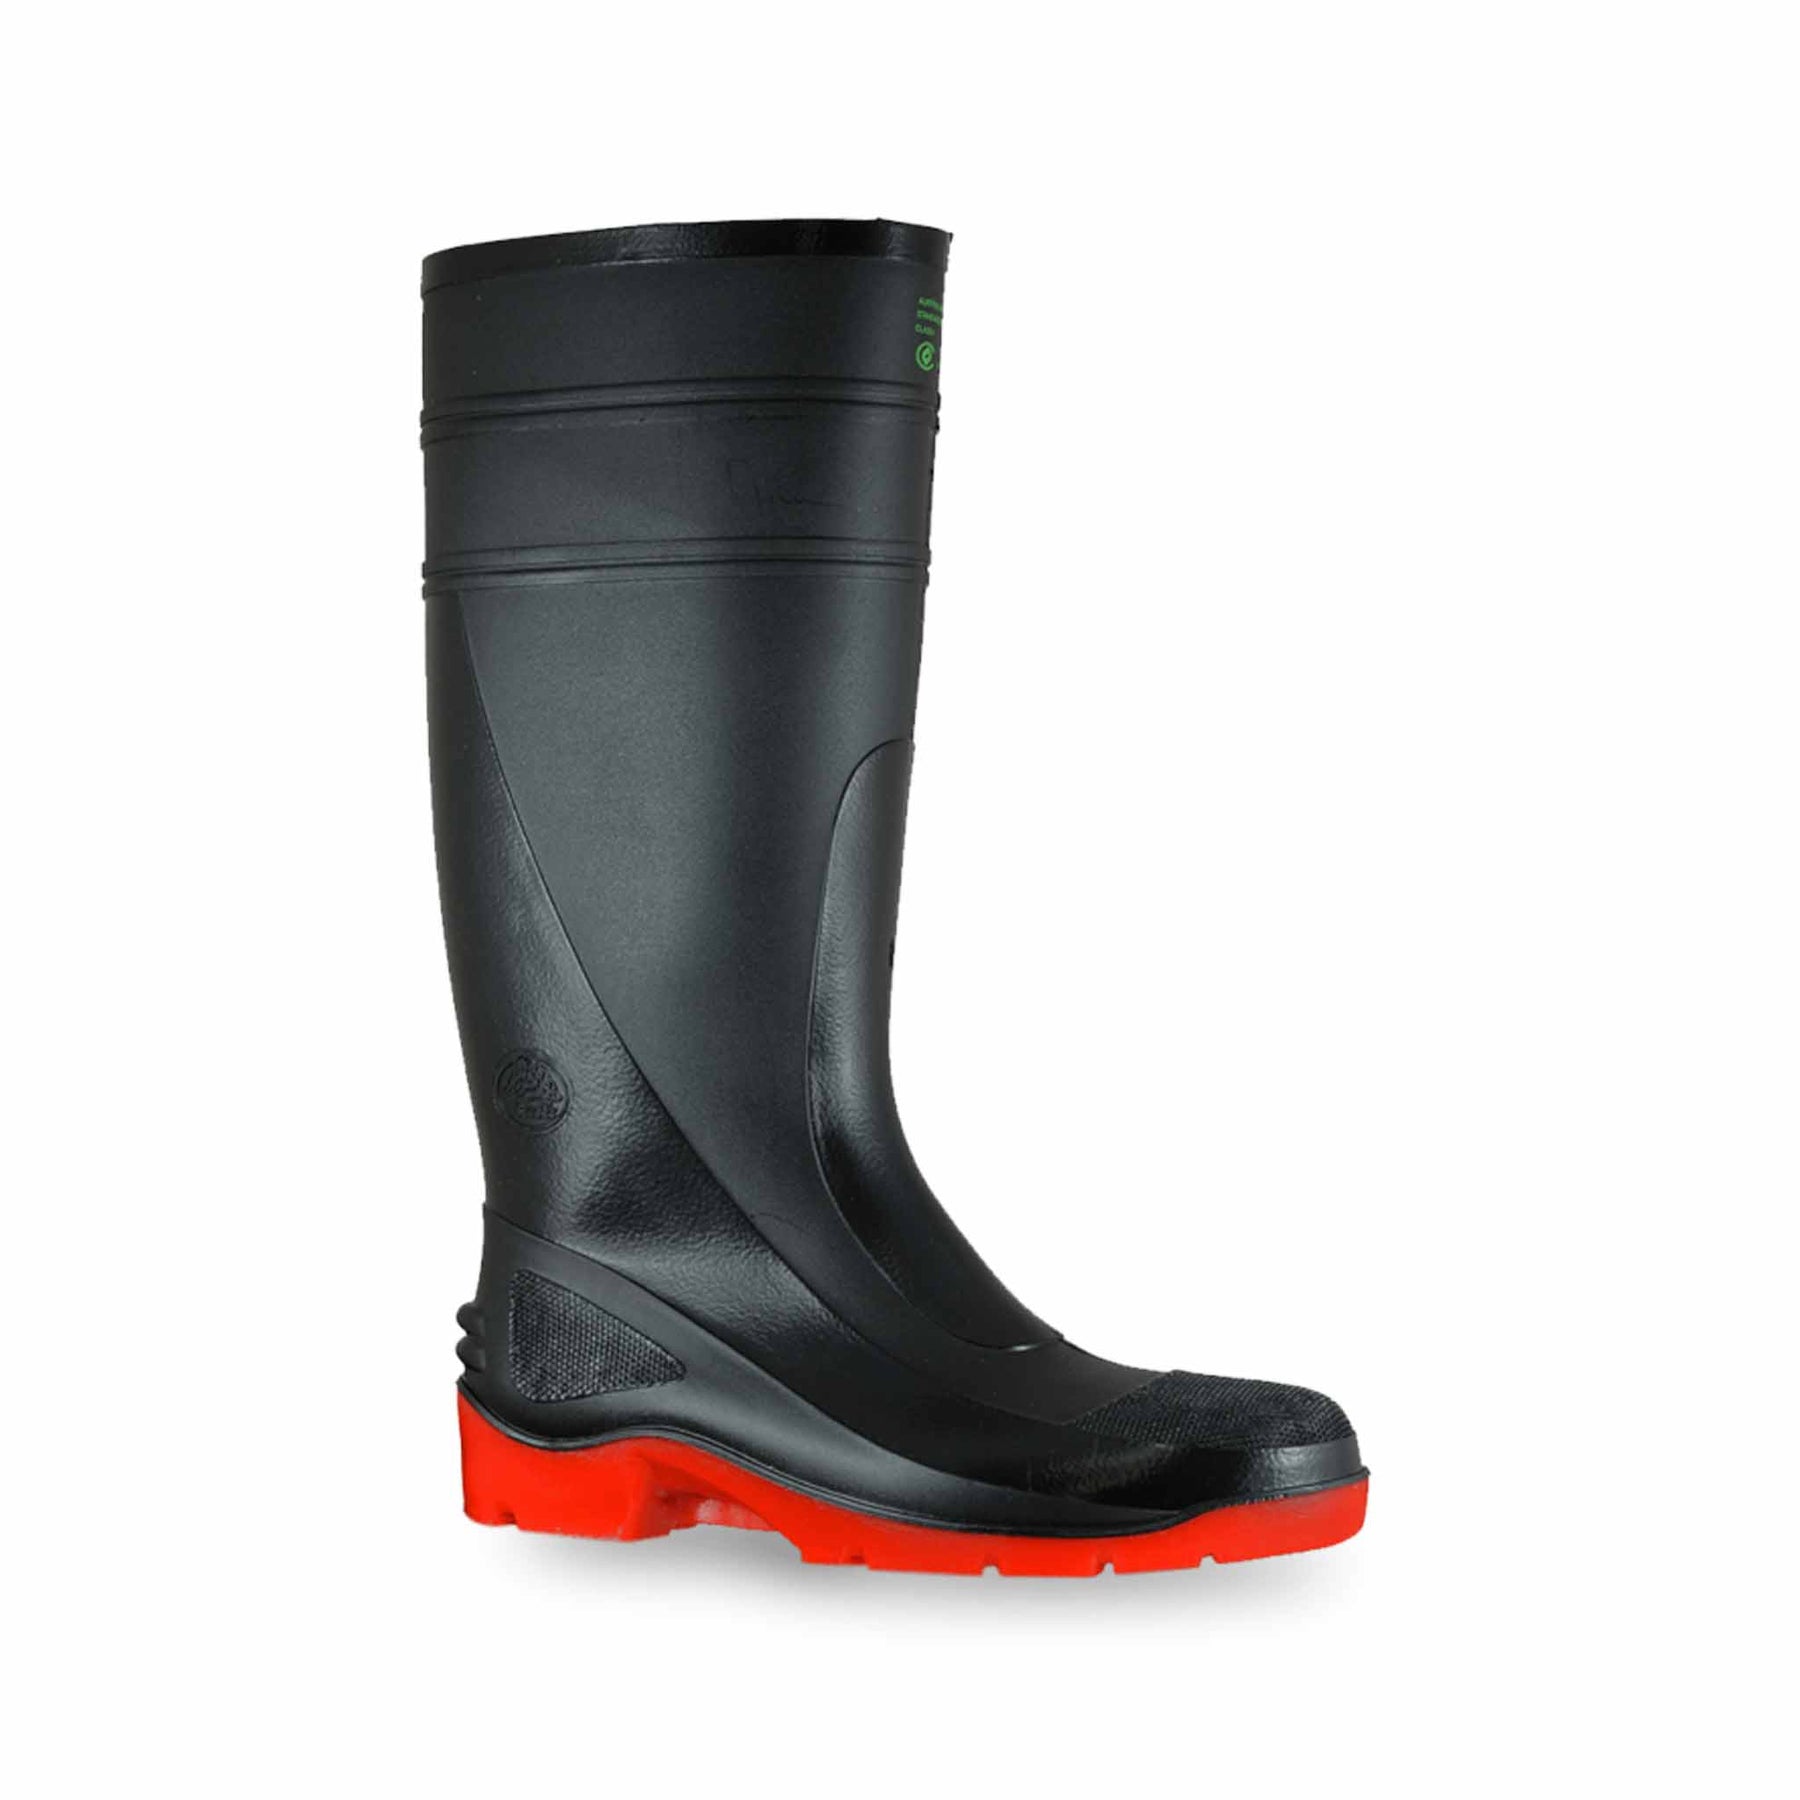 black and red gumboot